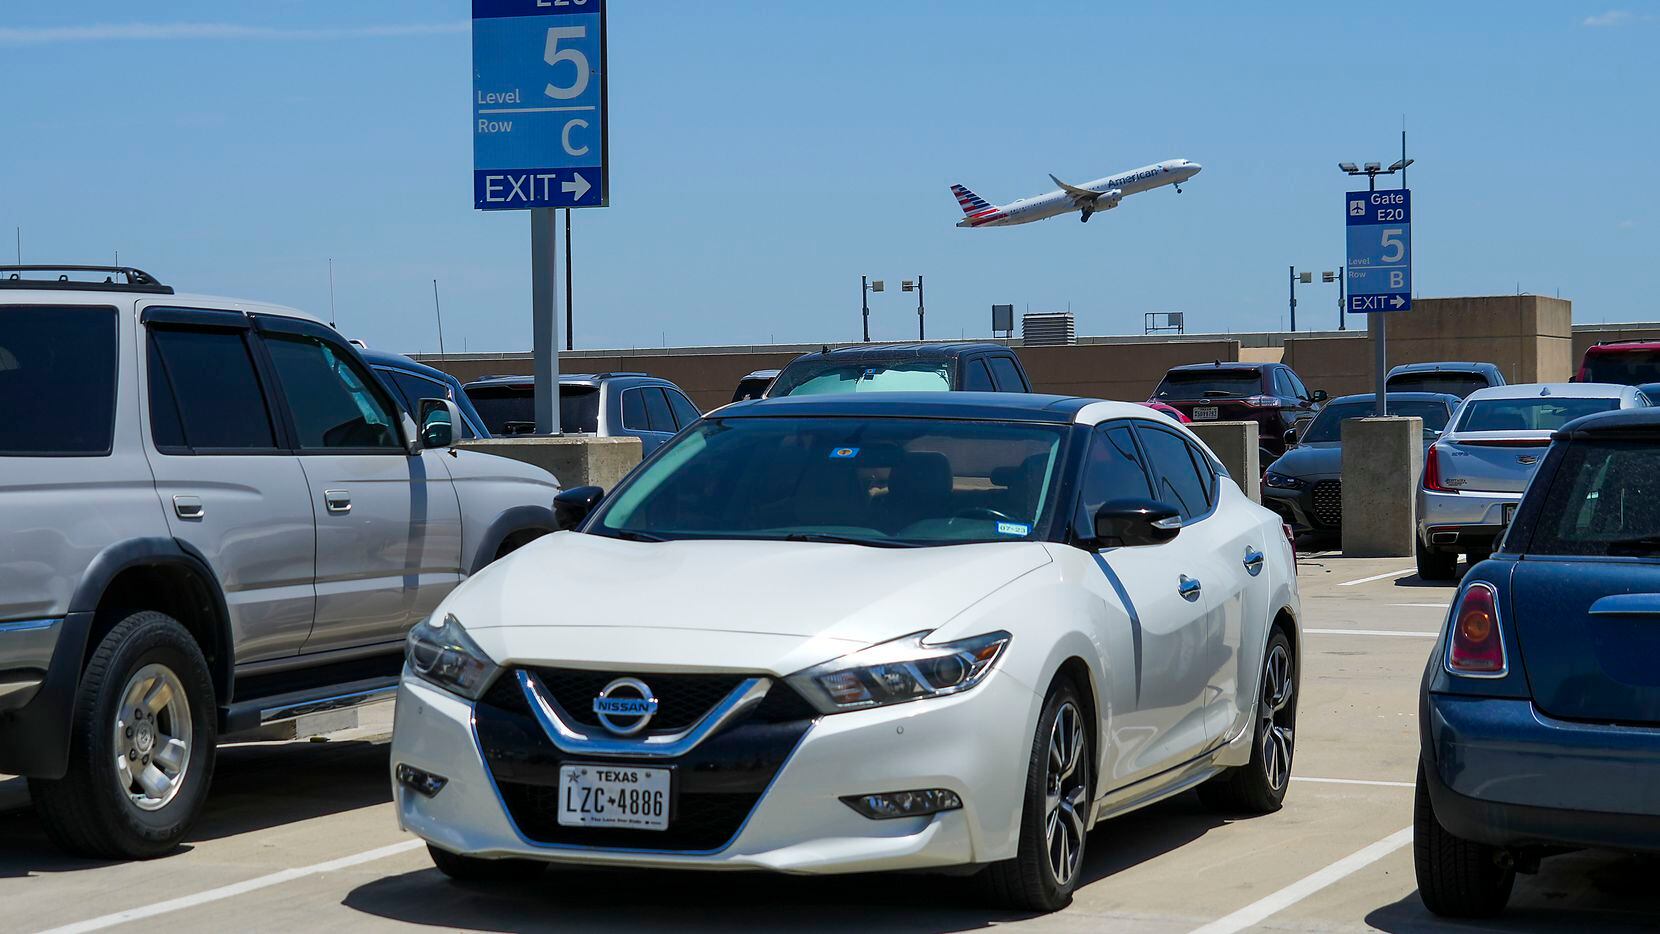 An American Airlines flight takes off over cars parked on the rooftop level of the terminal...